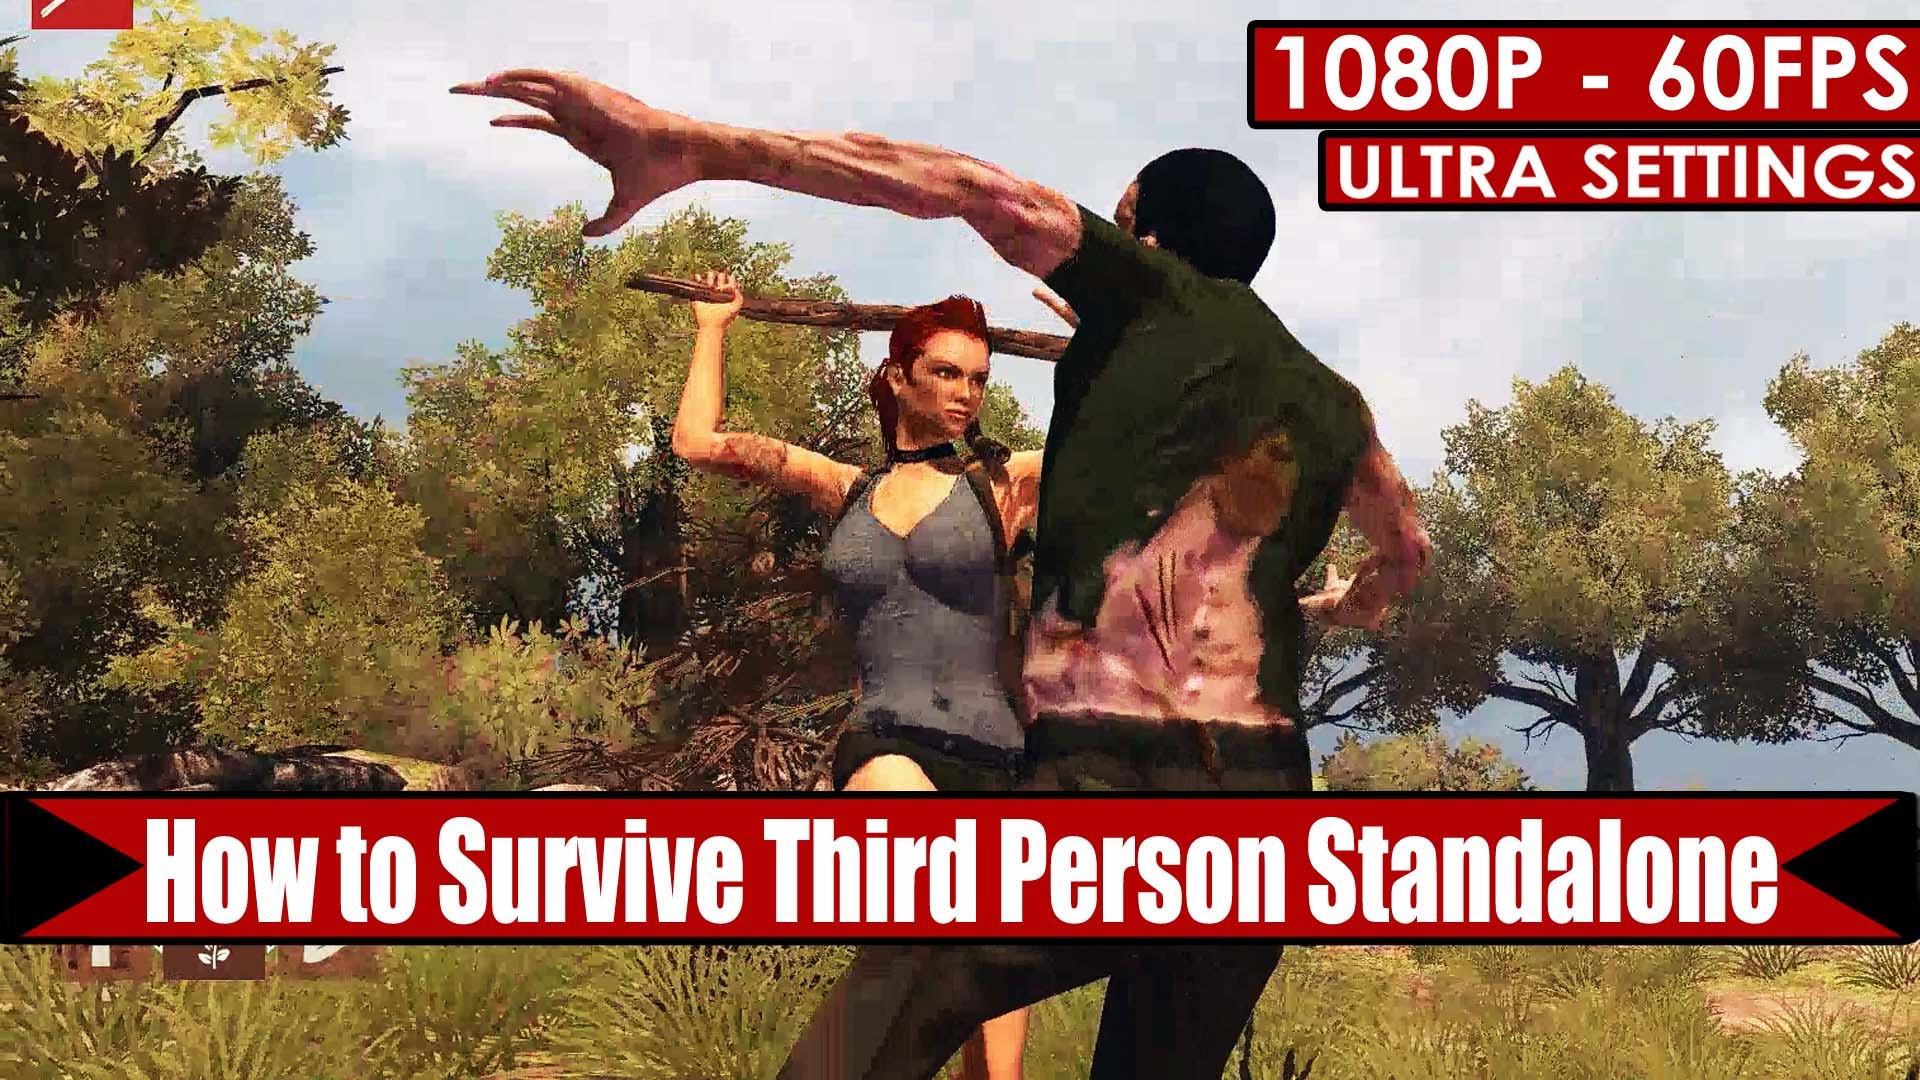 How To Survive: Third Person HD wallpapers, Desktop wallpaper - most viewed